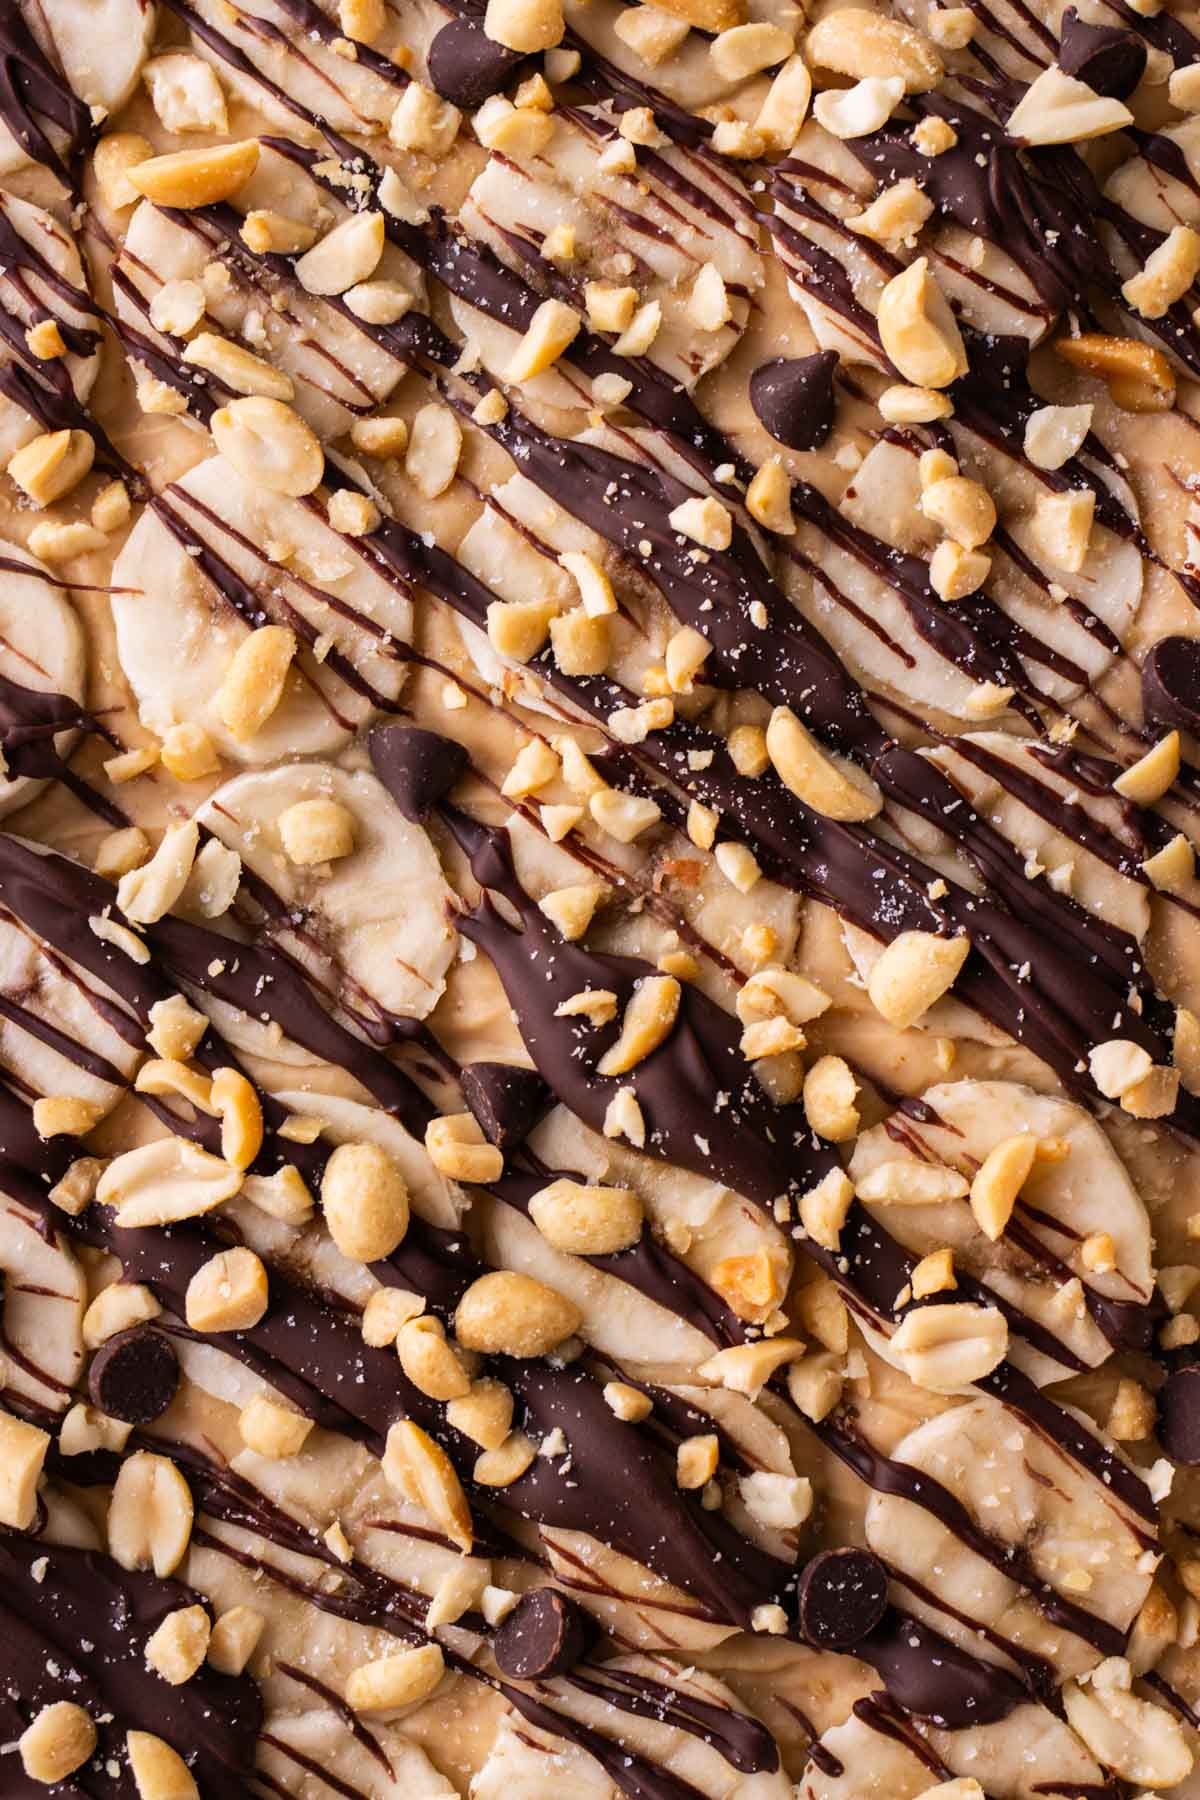 Chunky monkey frozen yogurt bark is topped with bananas, chocolate, and peanuts.